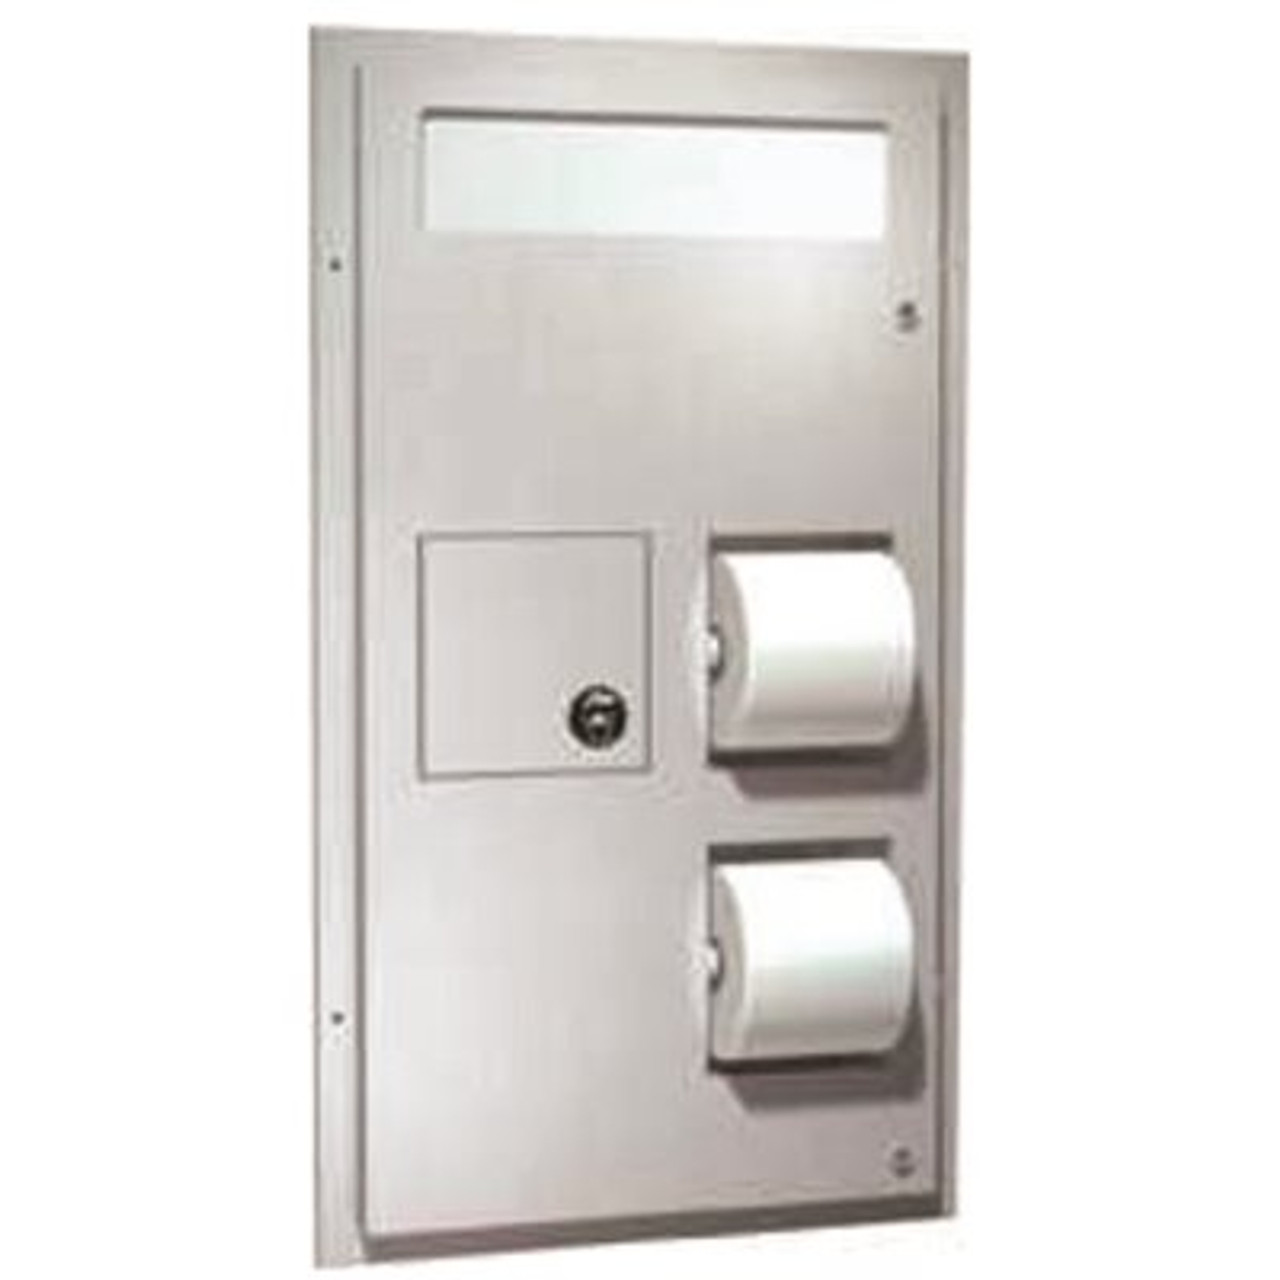 Recessed Toilet Seat Cover Dispenser and Toilet Tissue Dispensers with Napkin Disposal